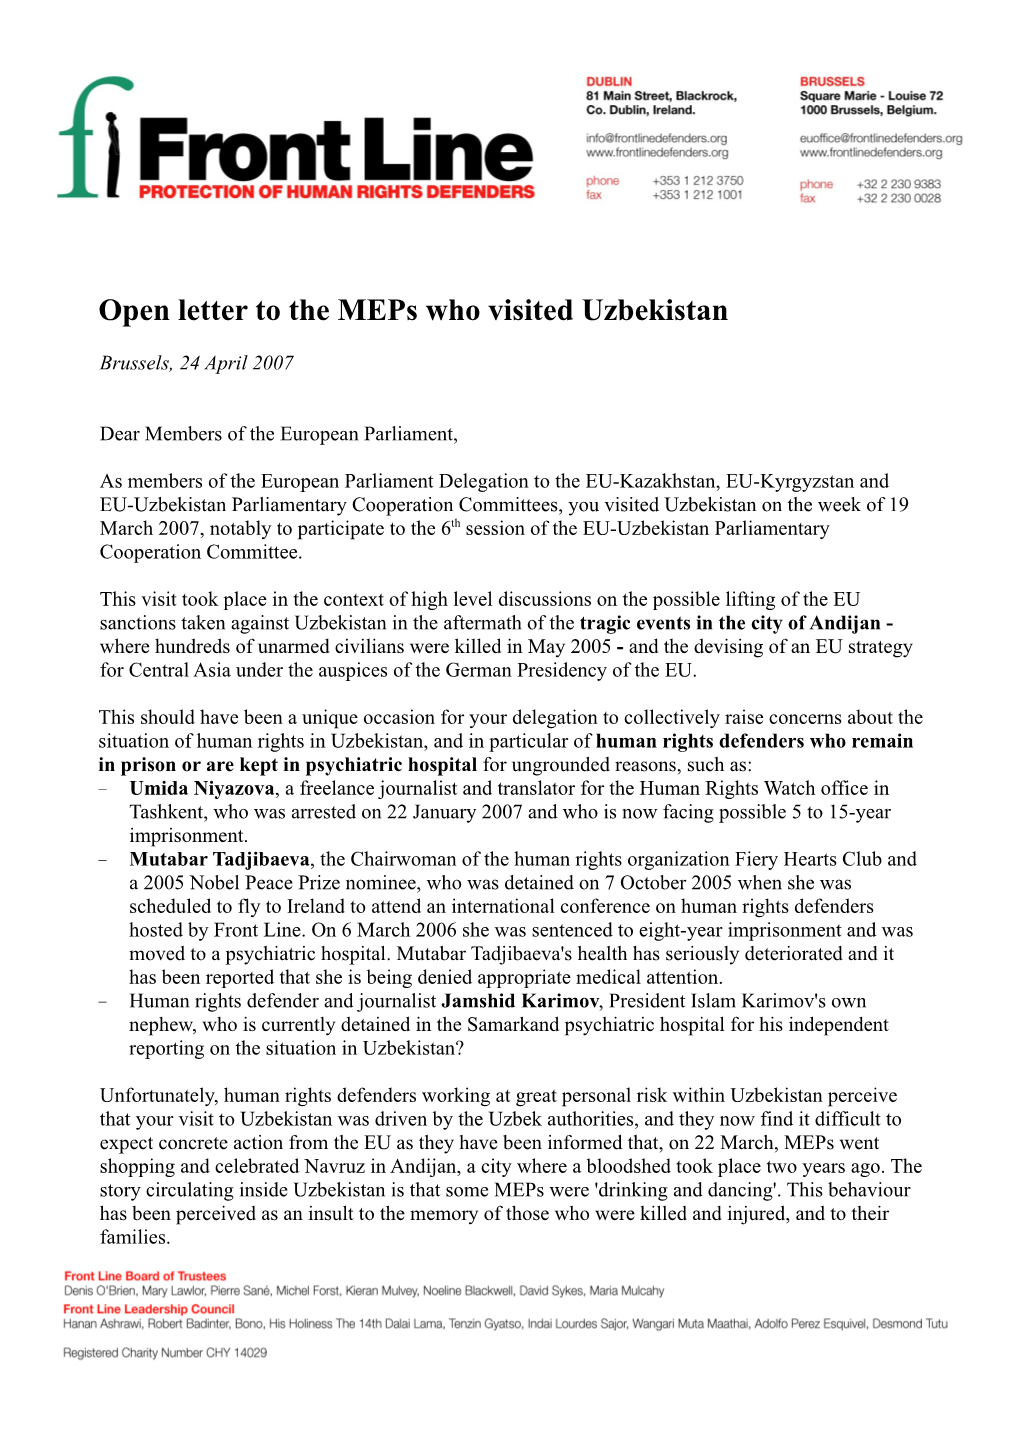 Open Letter to the Meps Who Visited Uzbekistan